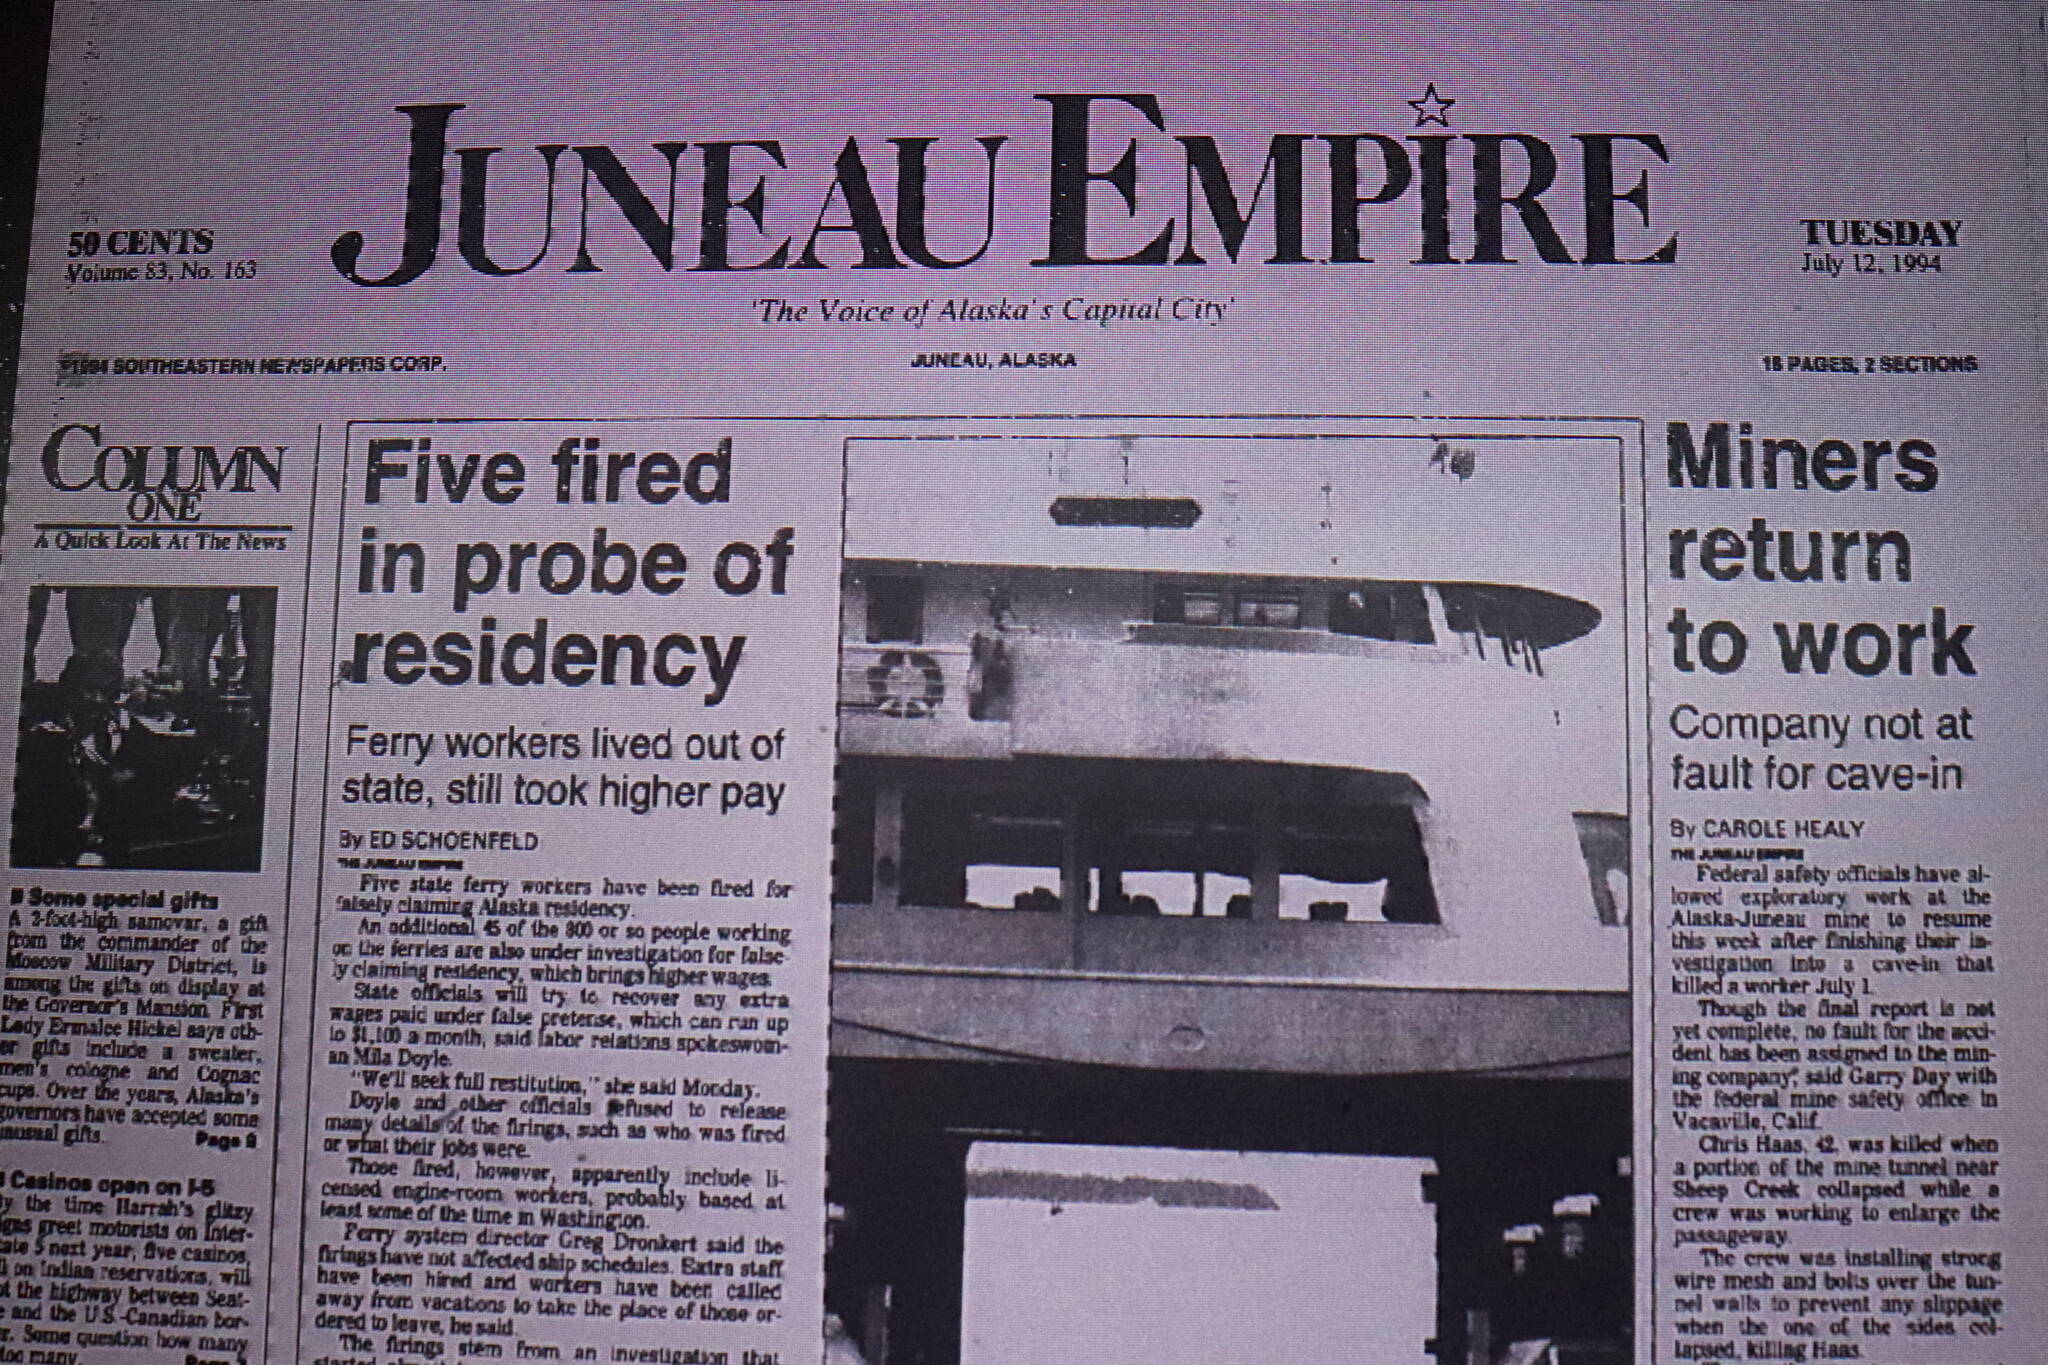 The front page of the Juneau Empire on July 12, 1994. (Mark Sabbatini / Juneau Empire)